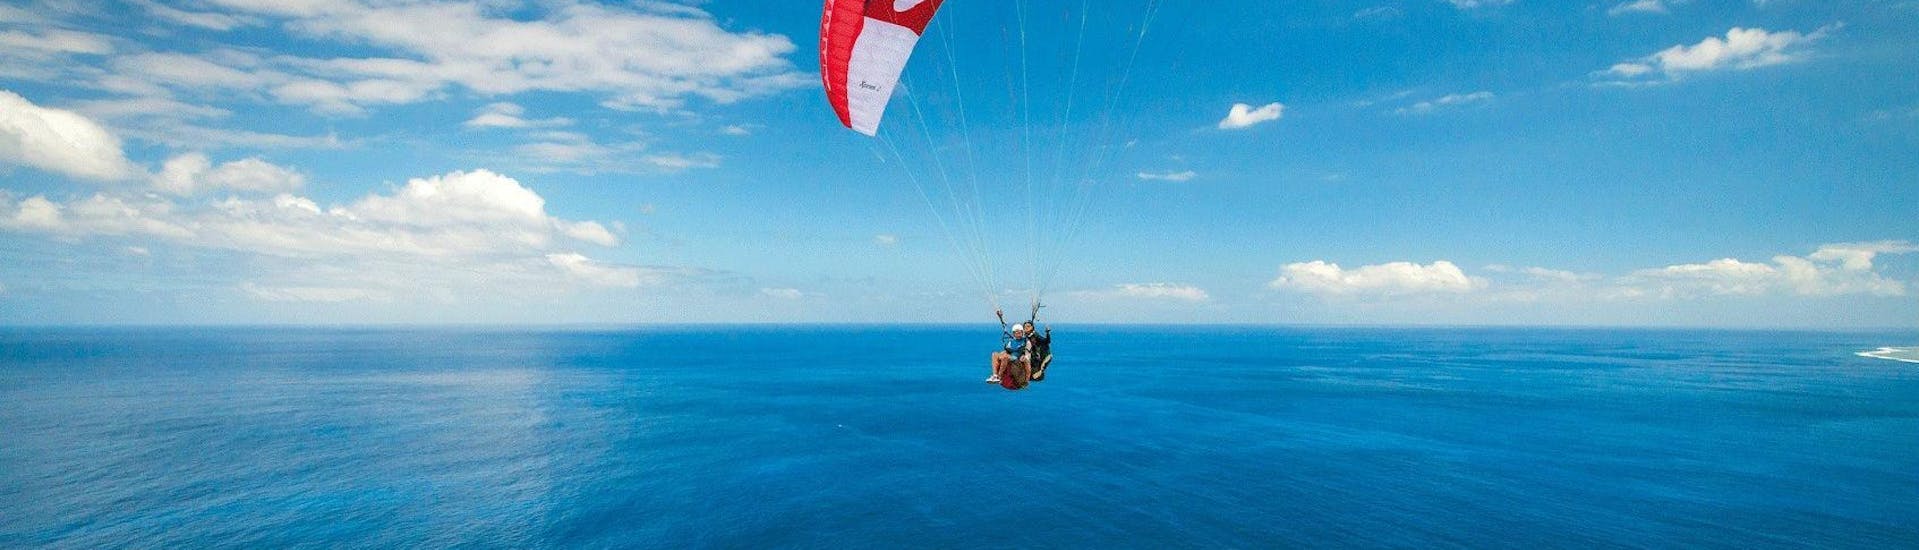 A paraglider pilot from Addict Parapente is flying over the Bay of St Leu during a Tandem Paragliding Flight "Sensation".